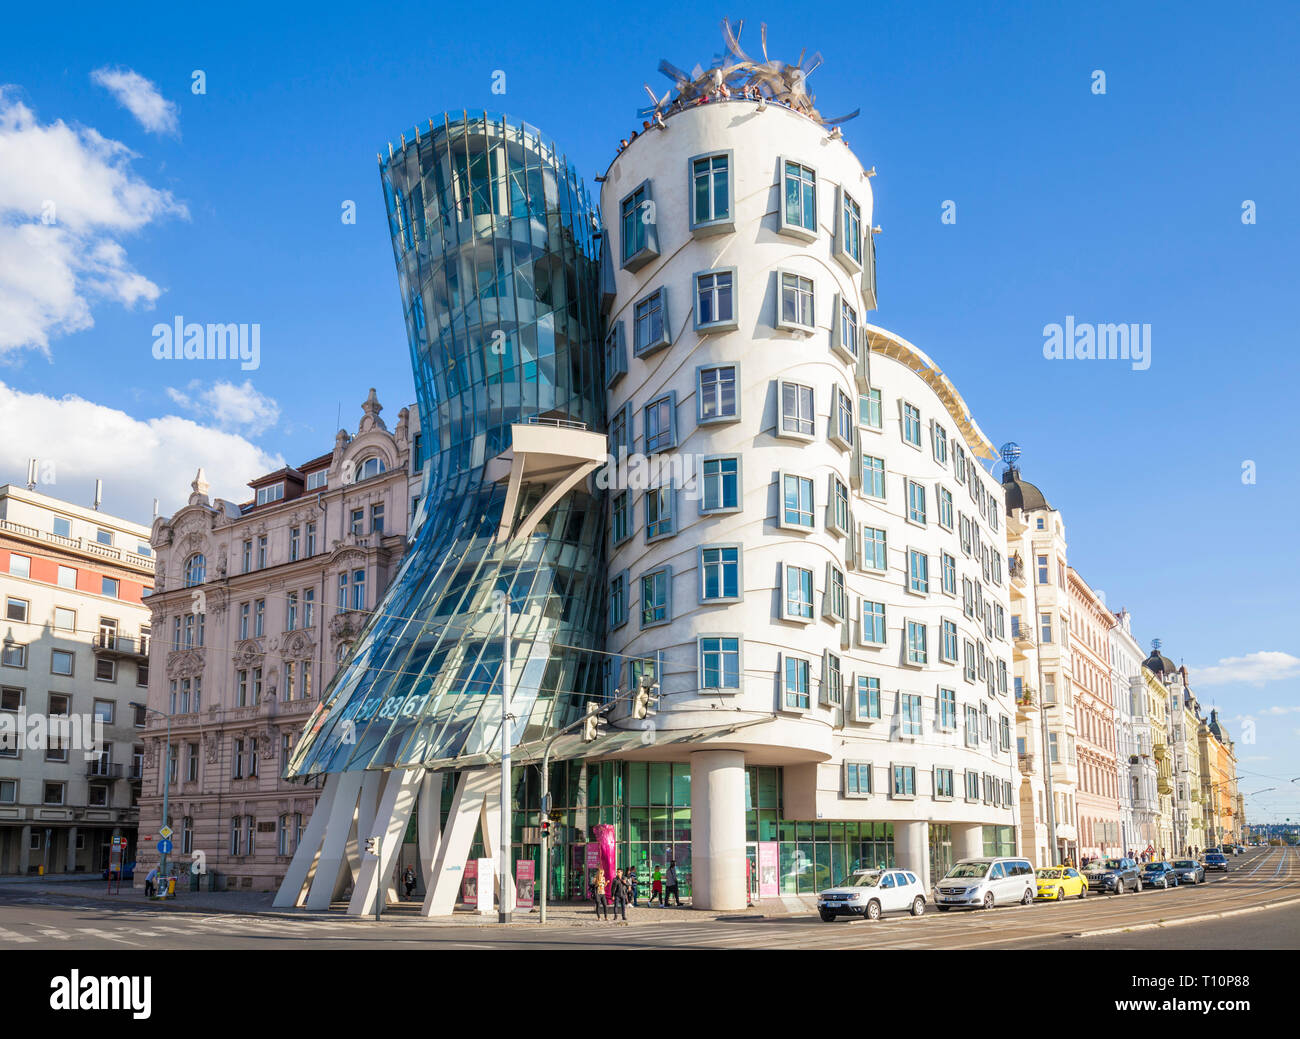 Front face of the Tančící dům or Dancing house PRAGUE known as the fred and ginger house Prague CZECH REPLUBLIC EU EUROPE Stock Photo